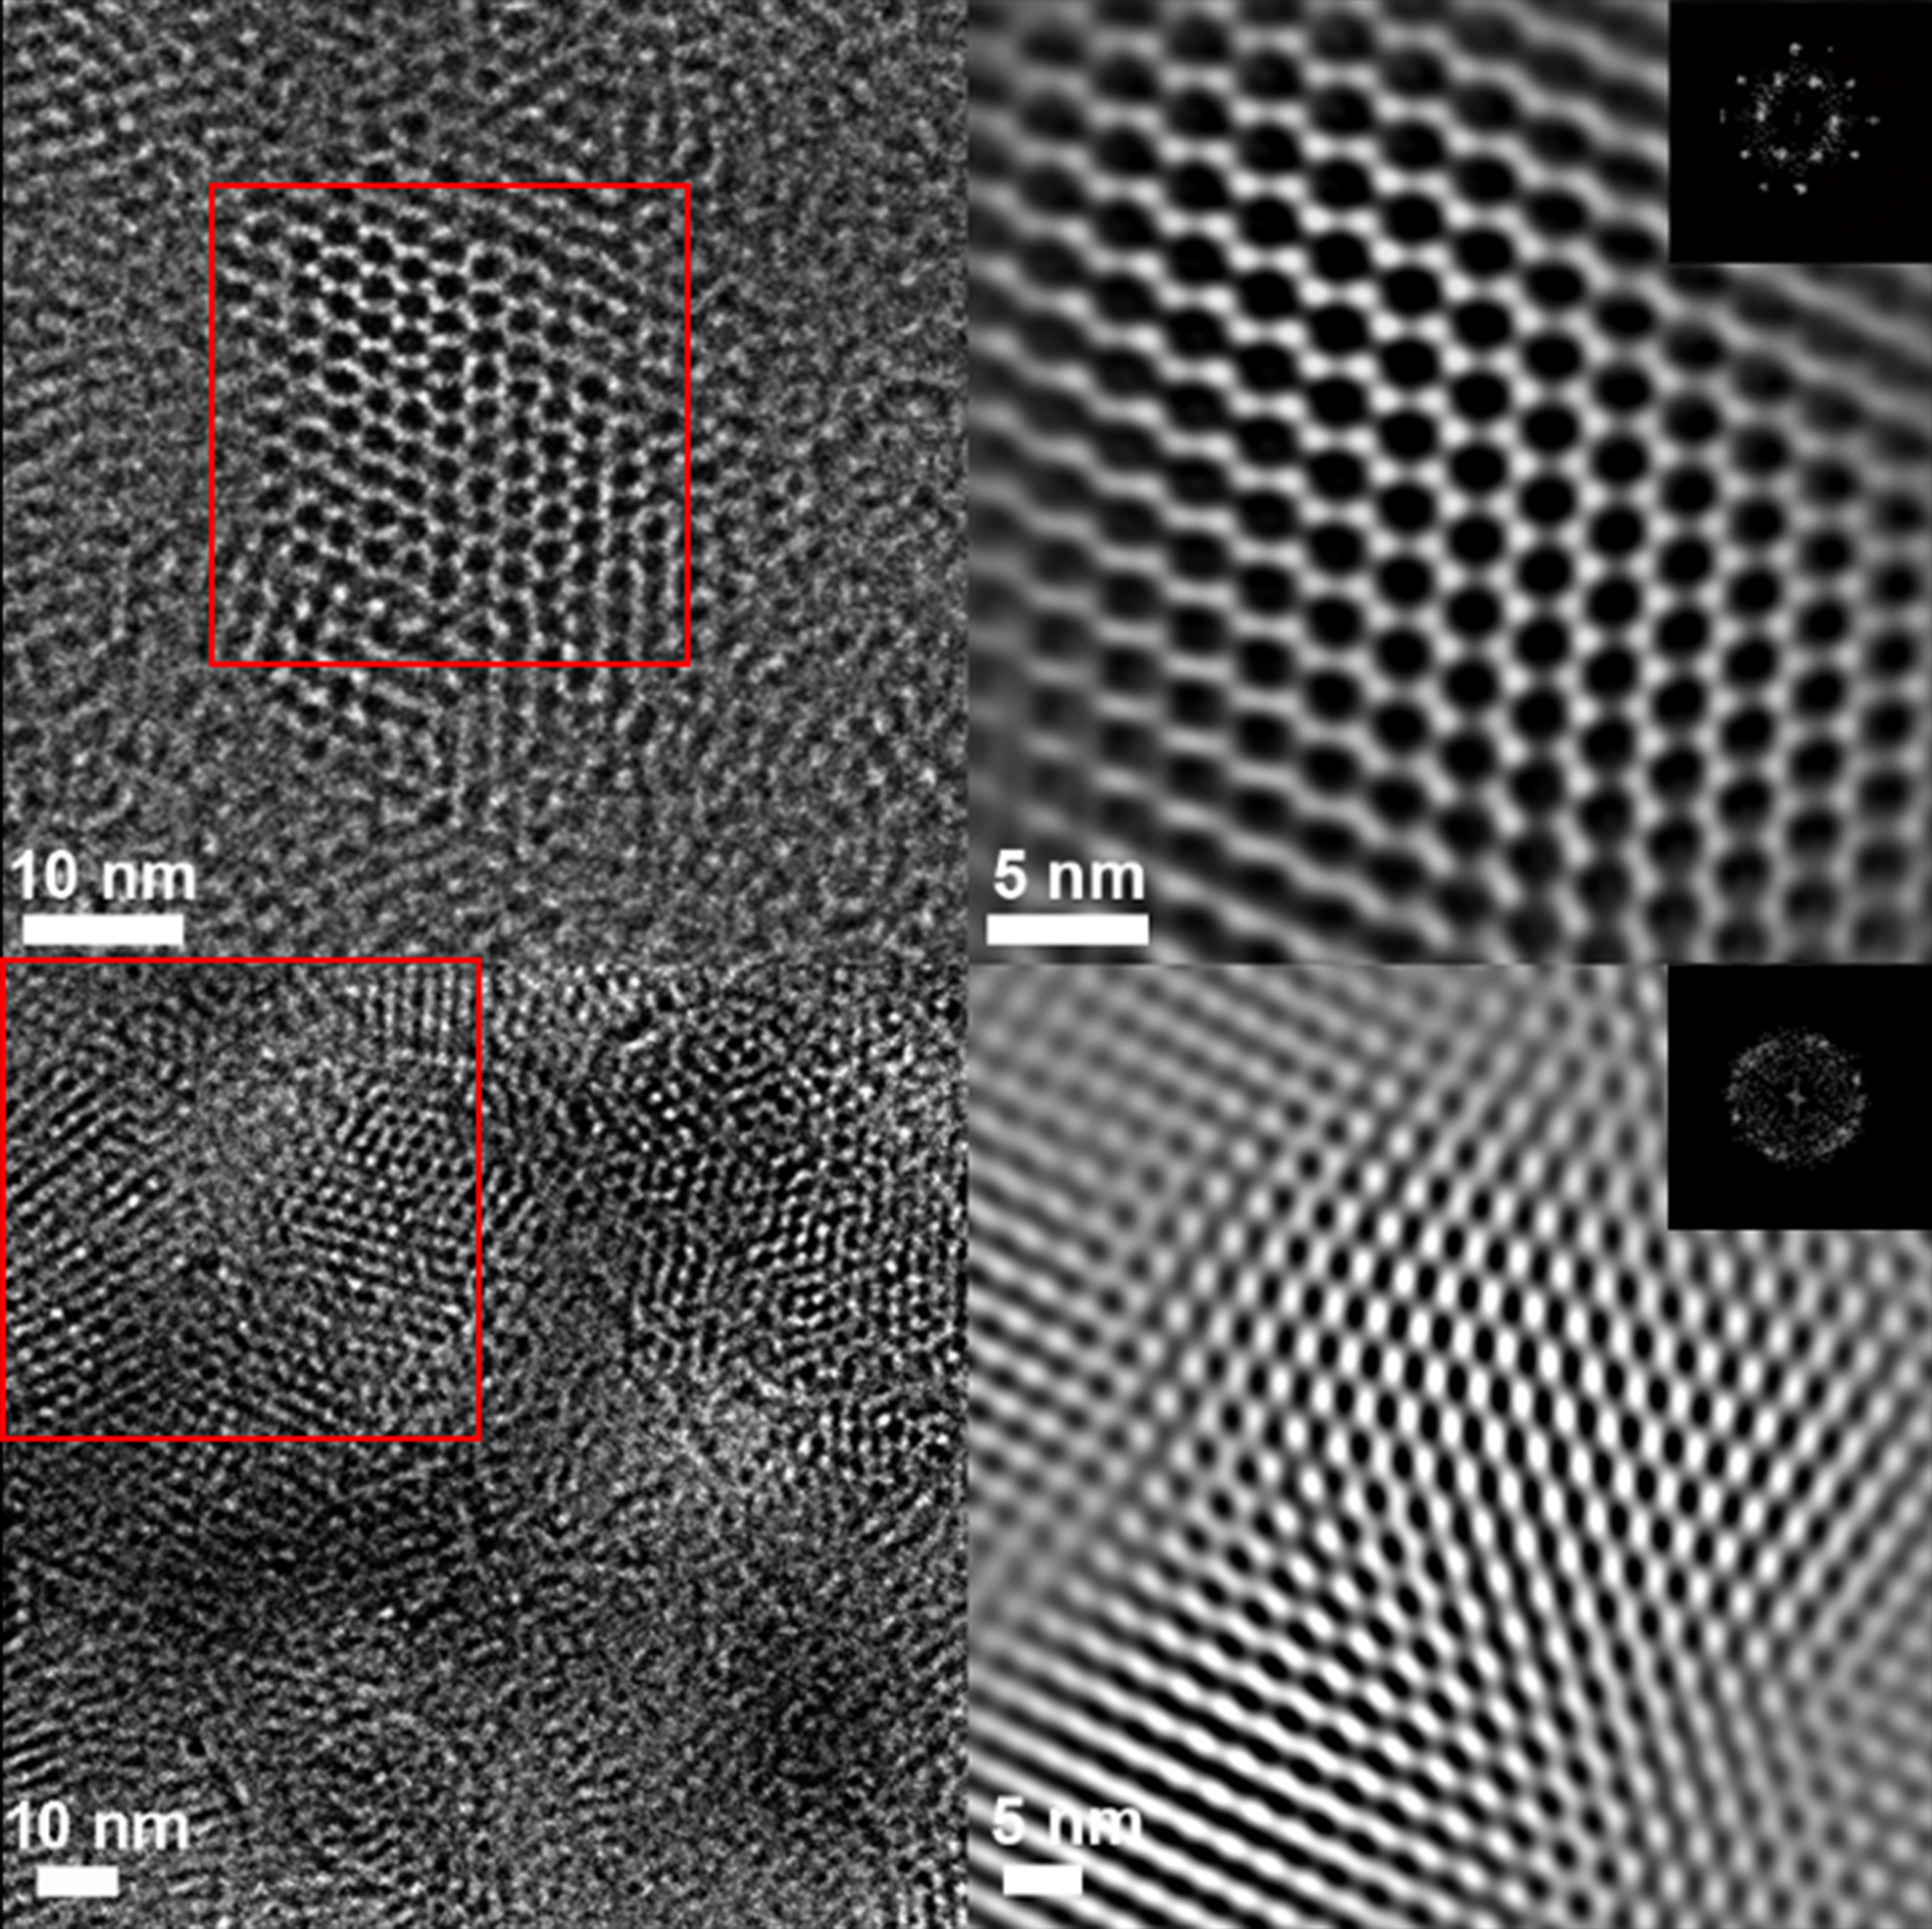 Images - These high-resolution transmission electron microscopy images, produced at Berkeley Lab's Molecular Foundry, show a structure formed by covalent organic frameworks (COFs) at different magnifications (top row), and a sheet of modified COFs (bottom row). (Credit: Berkeley Lab)